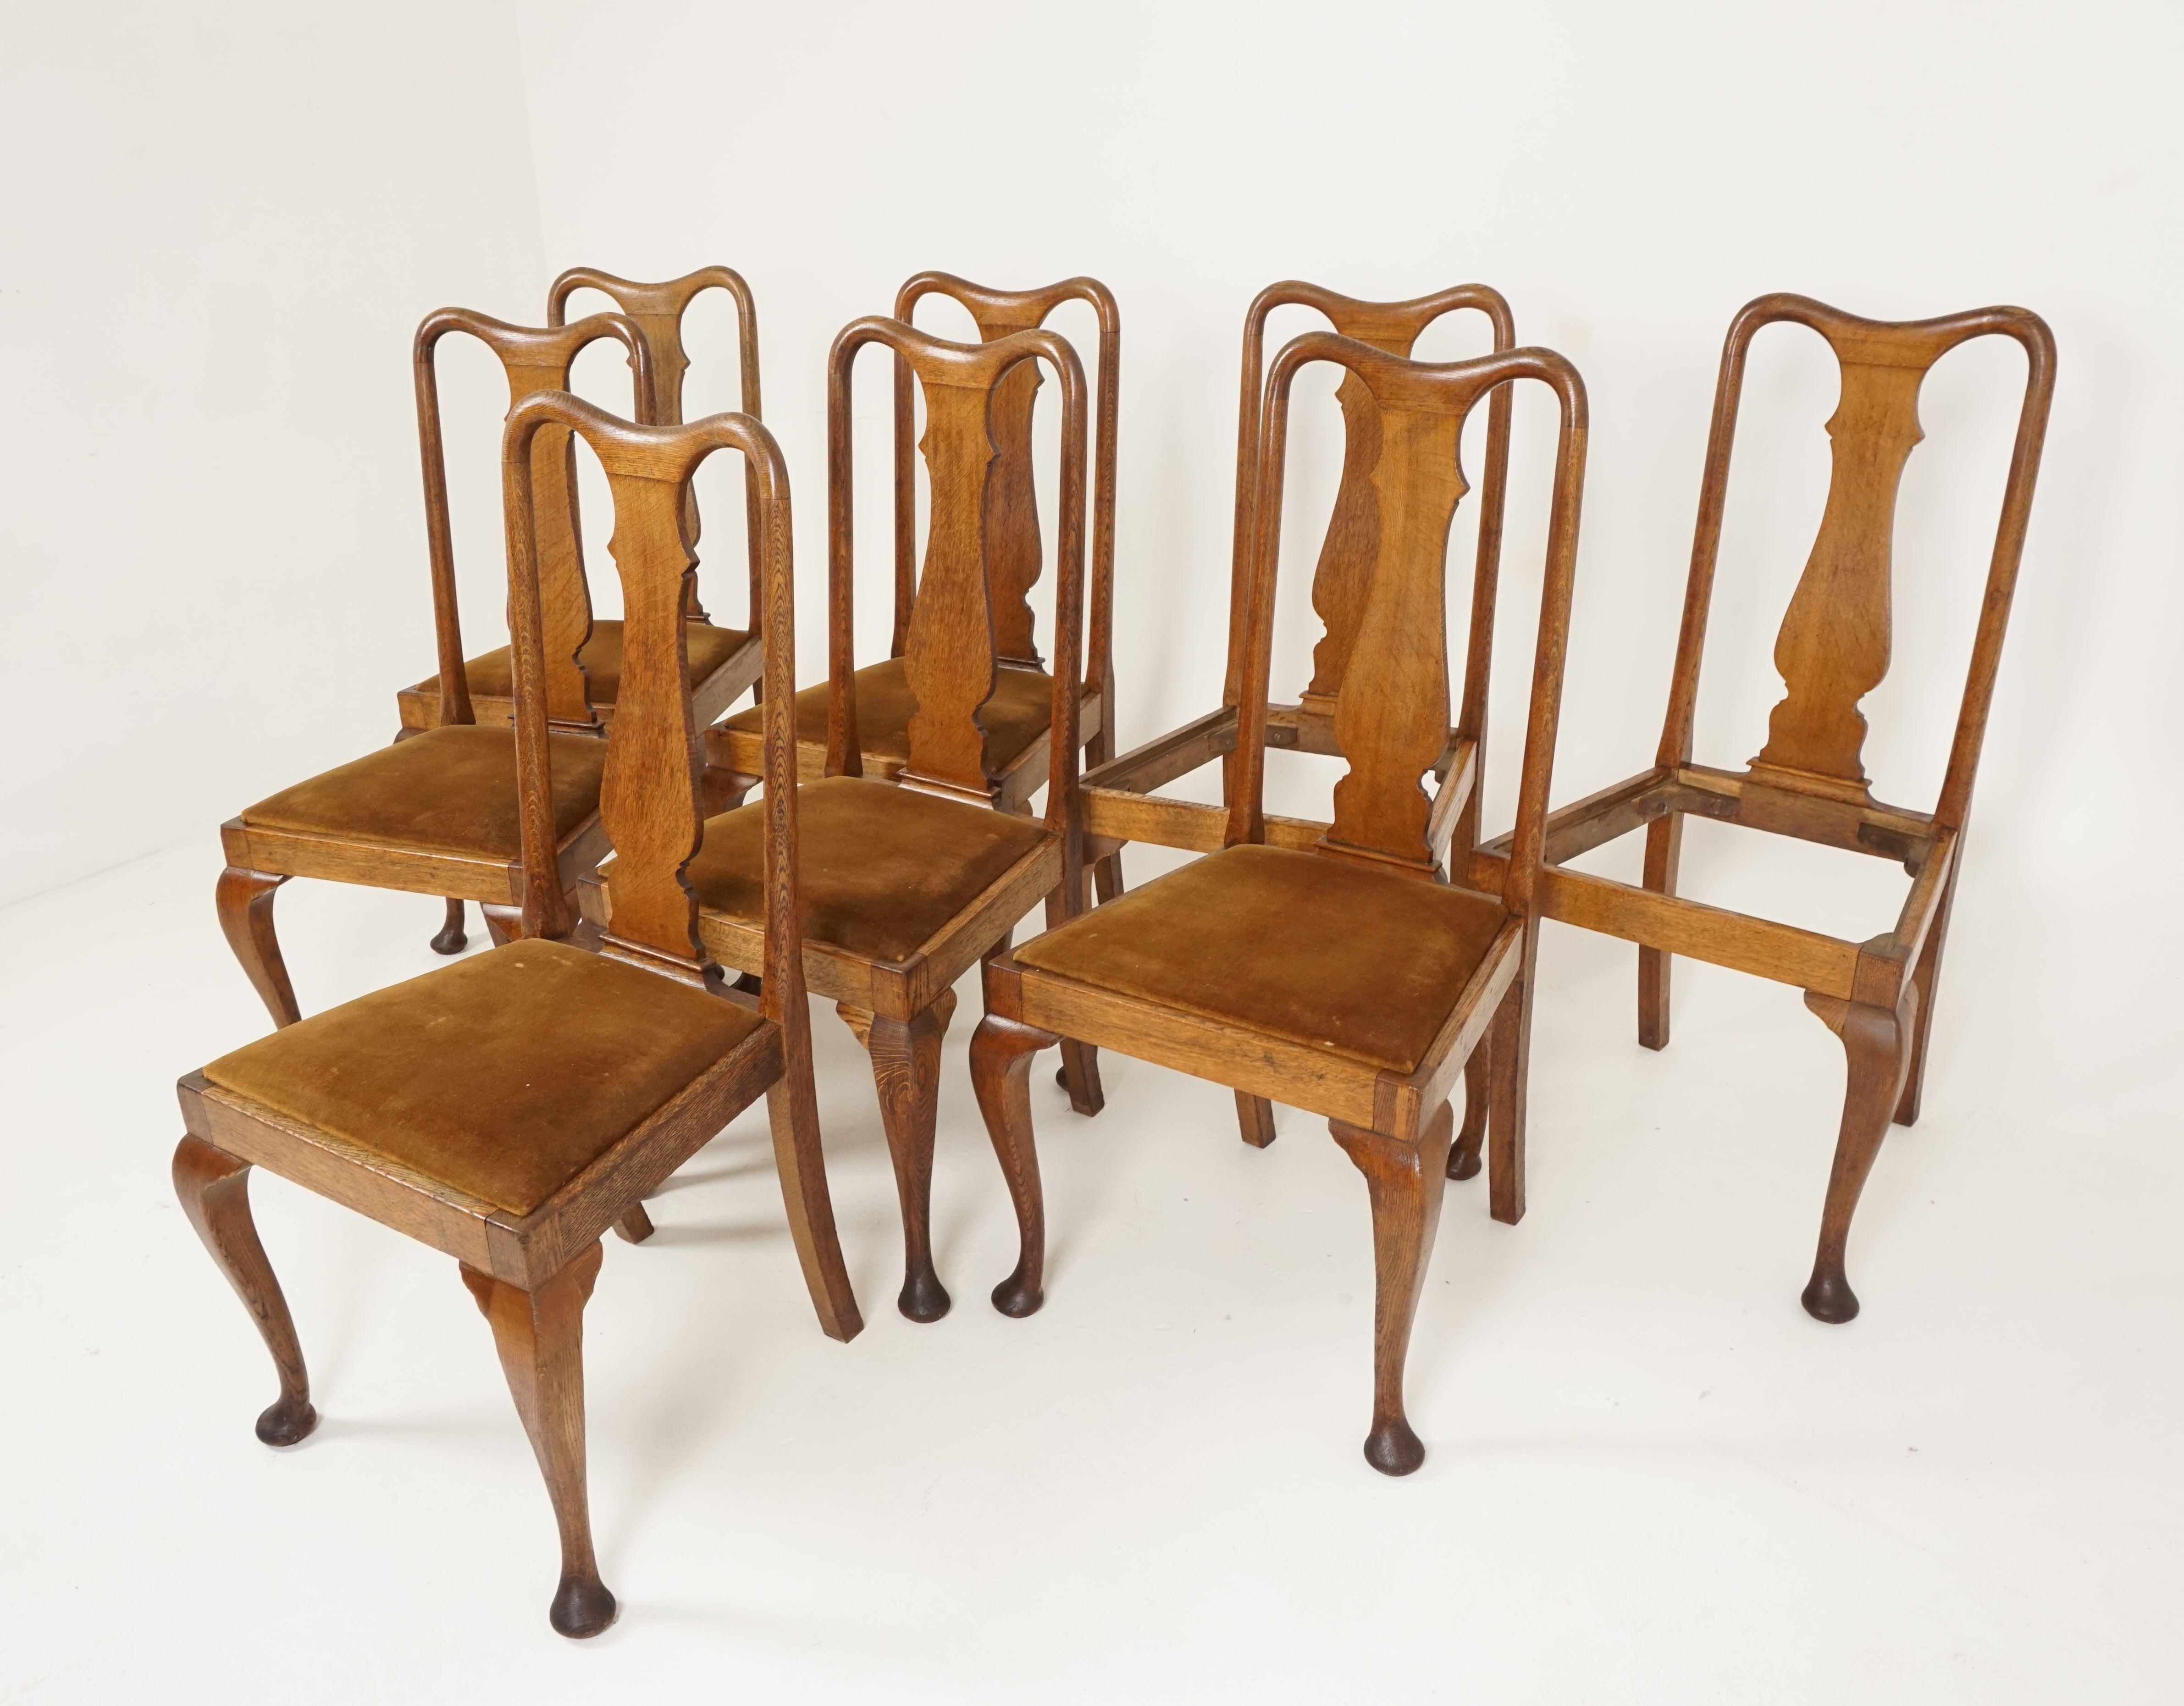 Antique set of chairs, Queen Anne style, oak, 8 dining chairs, Scotland 1910, B2327

Scotland, 1910
Solid oak
Original finish
Lovey high shaped backs
Shaped centre splat
Lift out upholstered seat
All standing on queen Anne style front